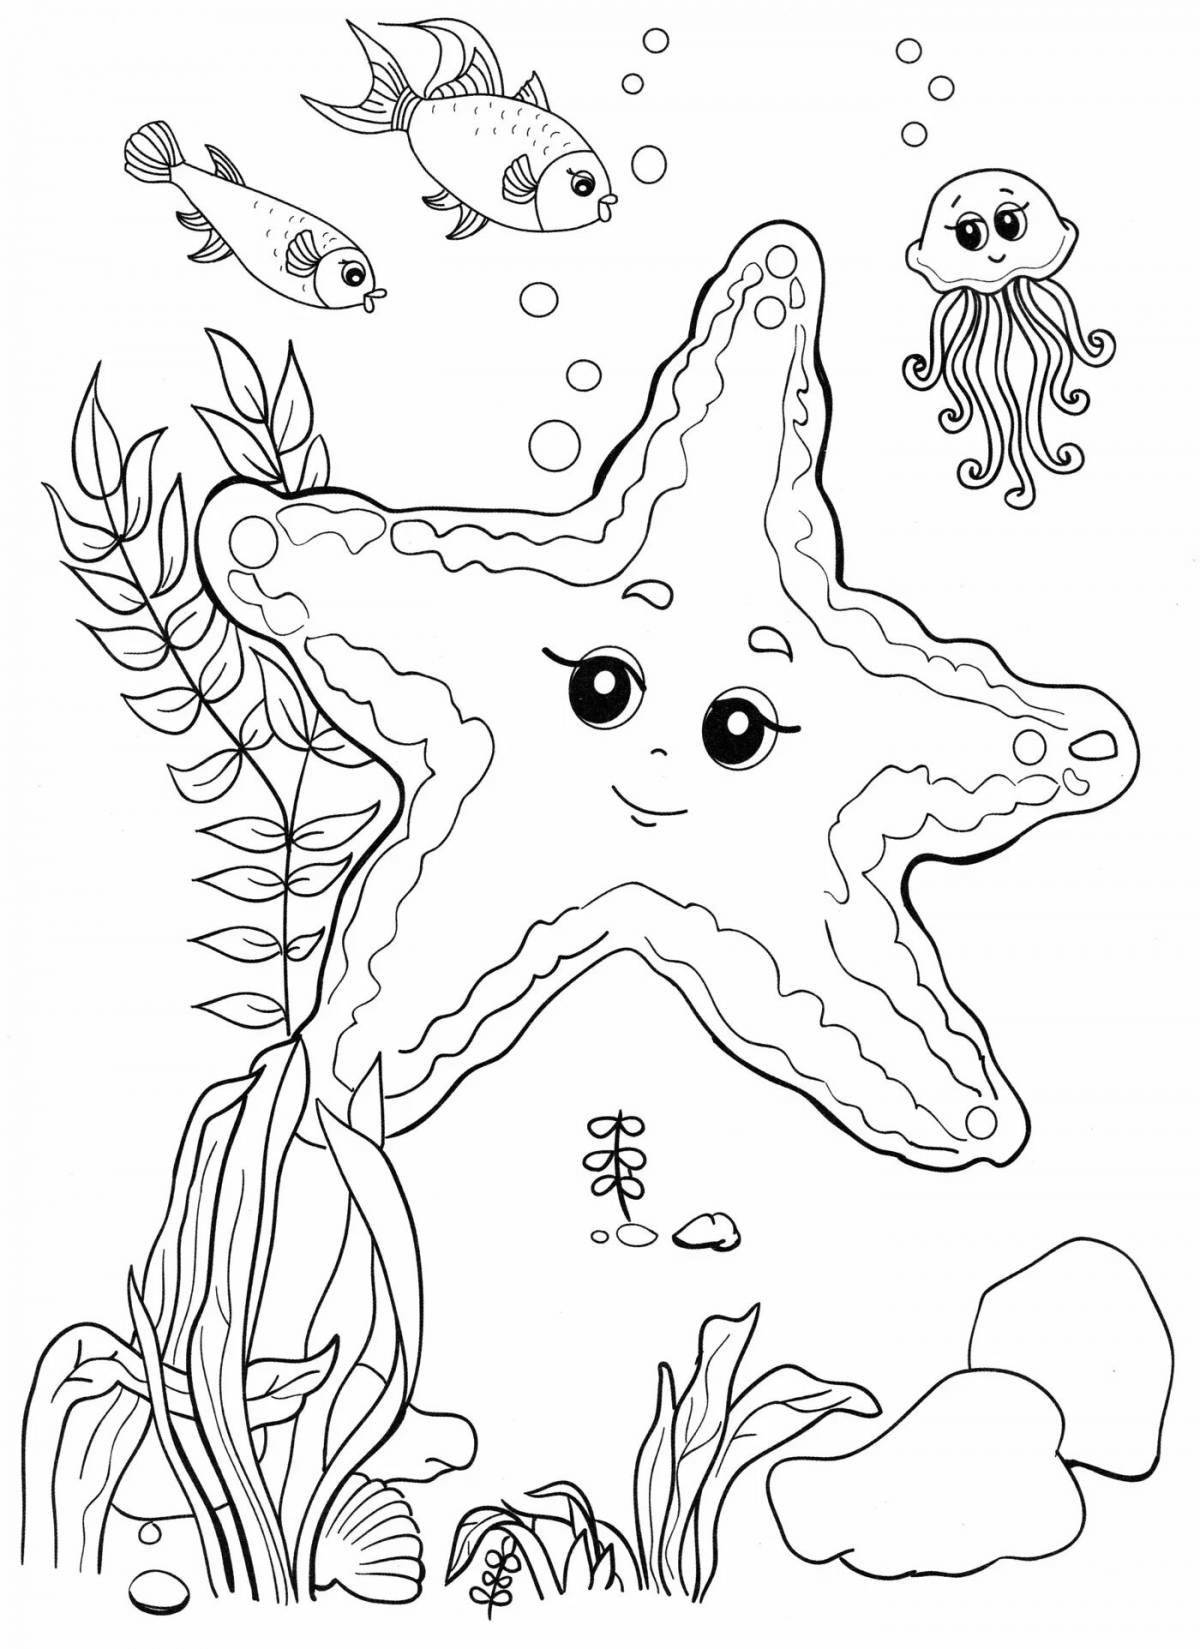 Wonderful sea animals coloring pages for kids